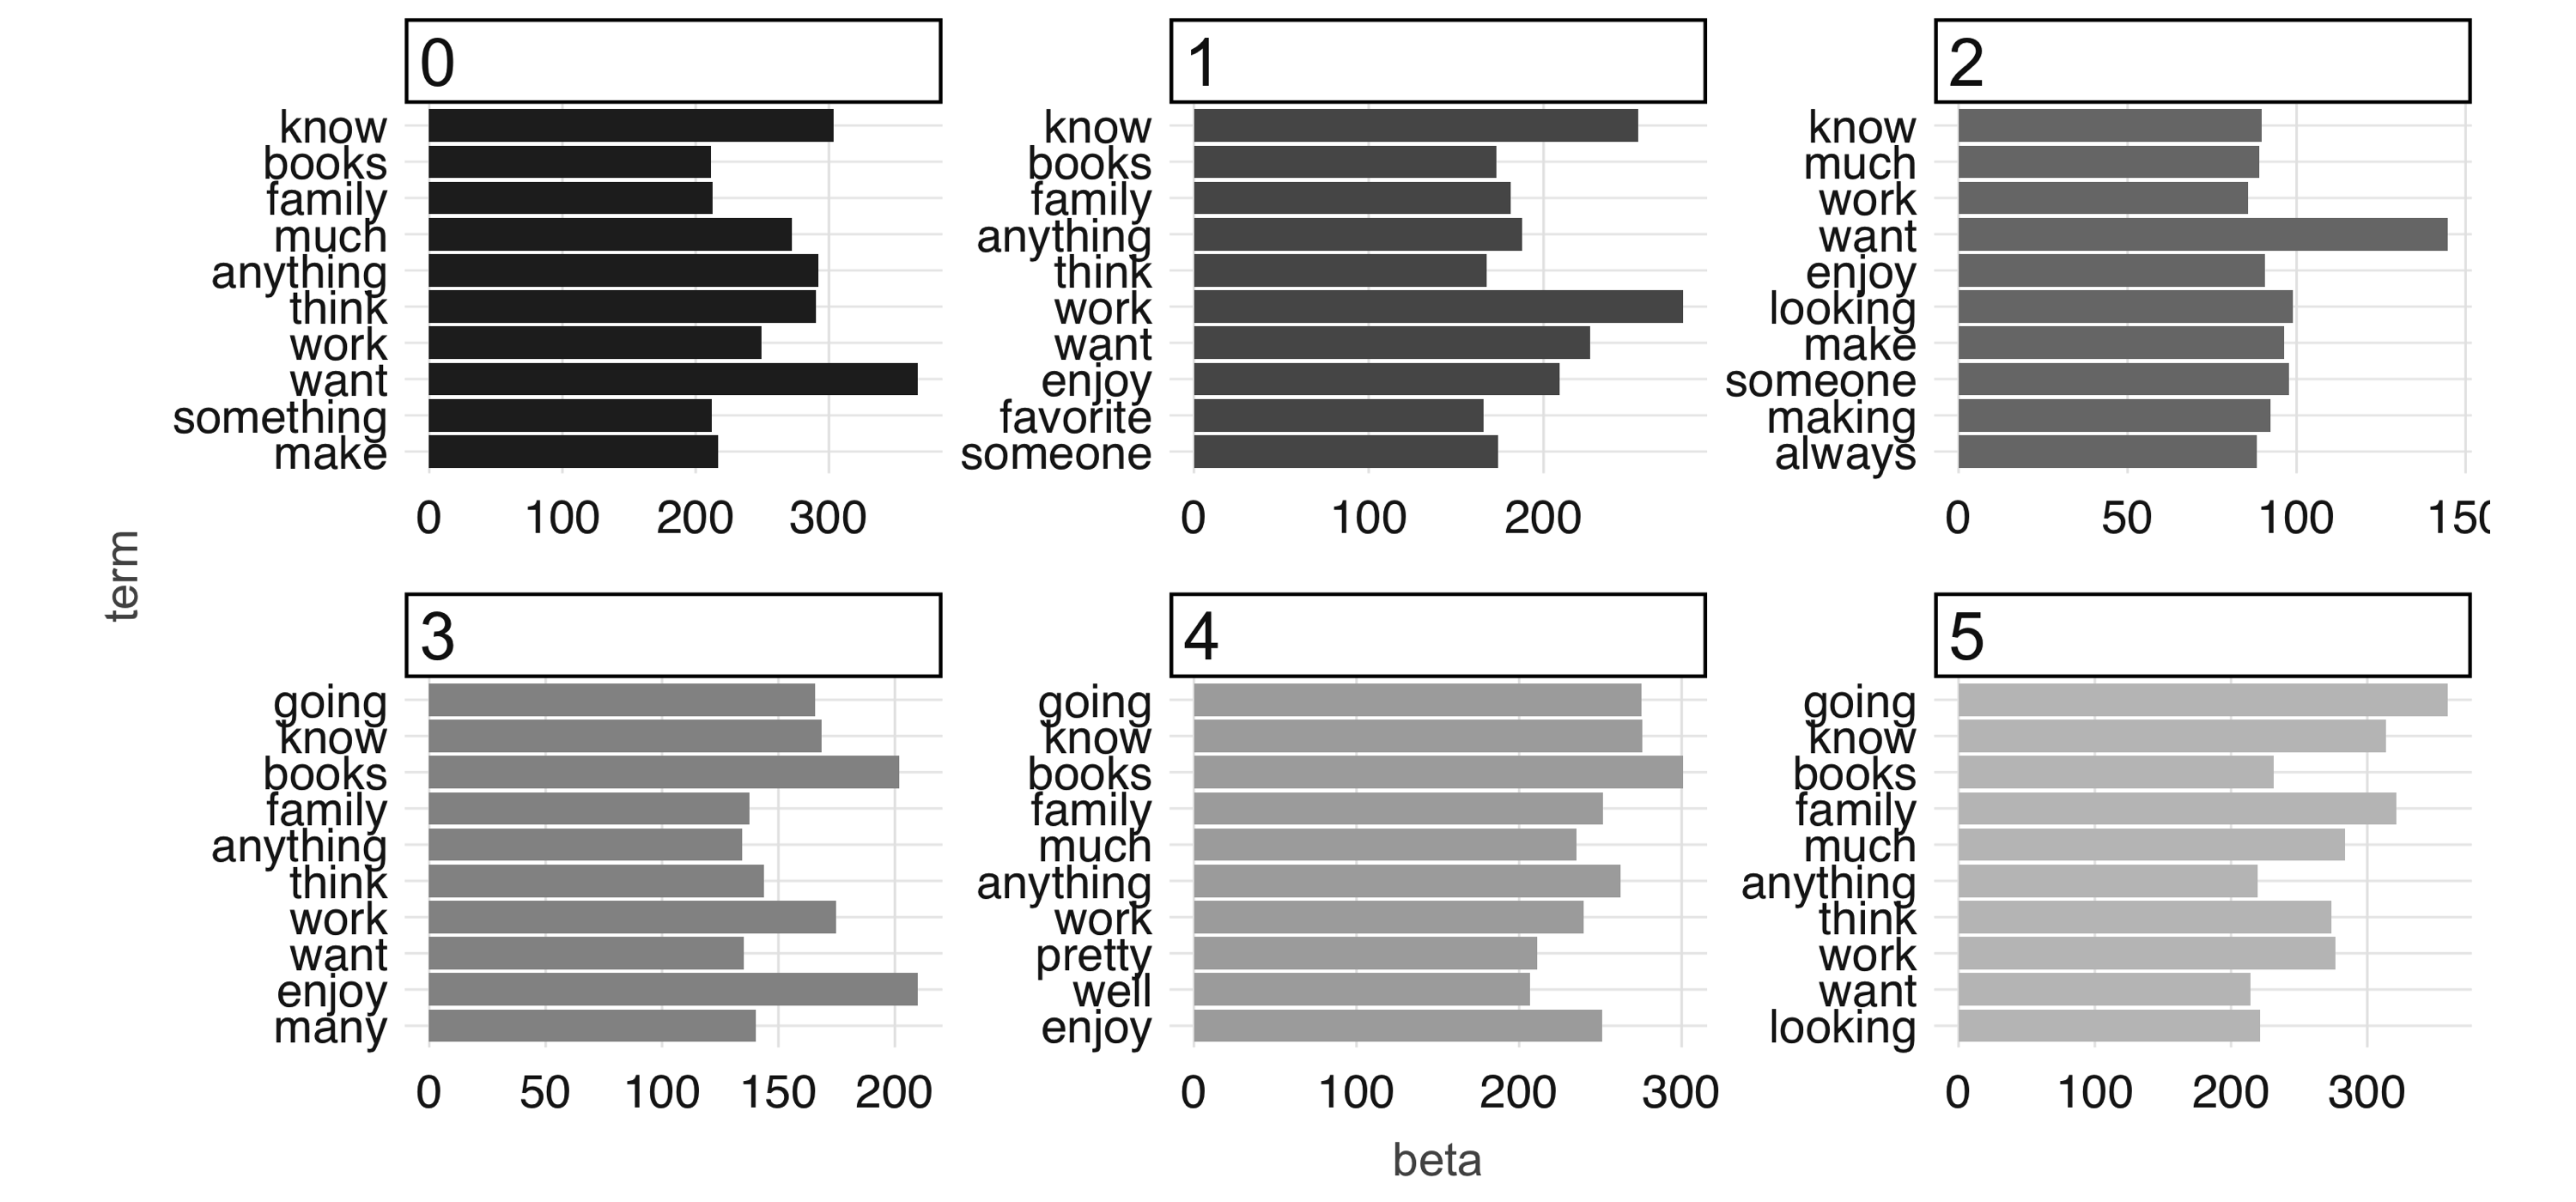 The most common terms per topic in the first iteration